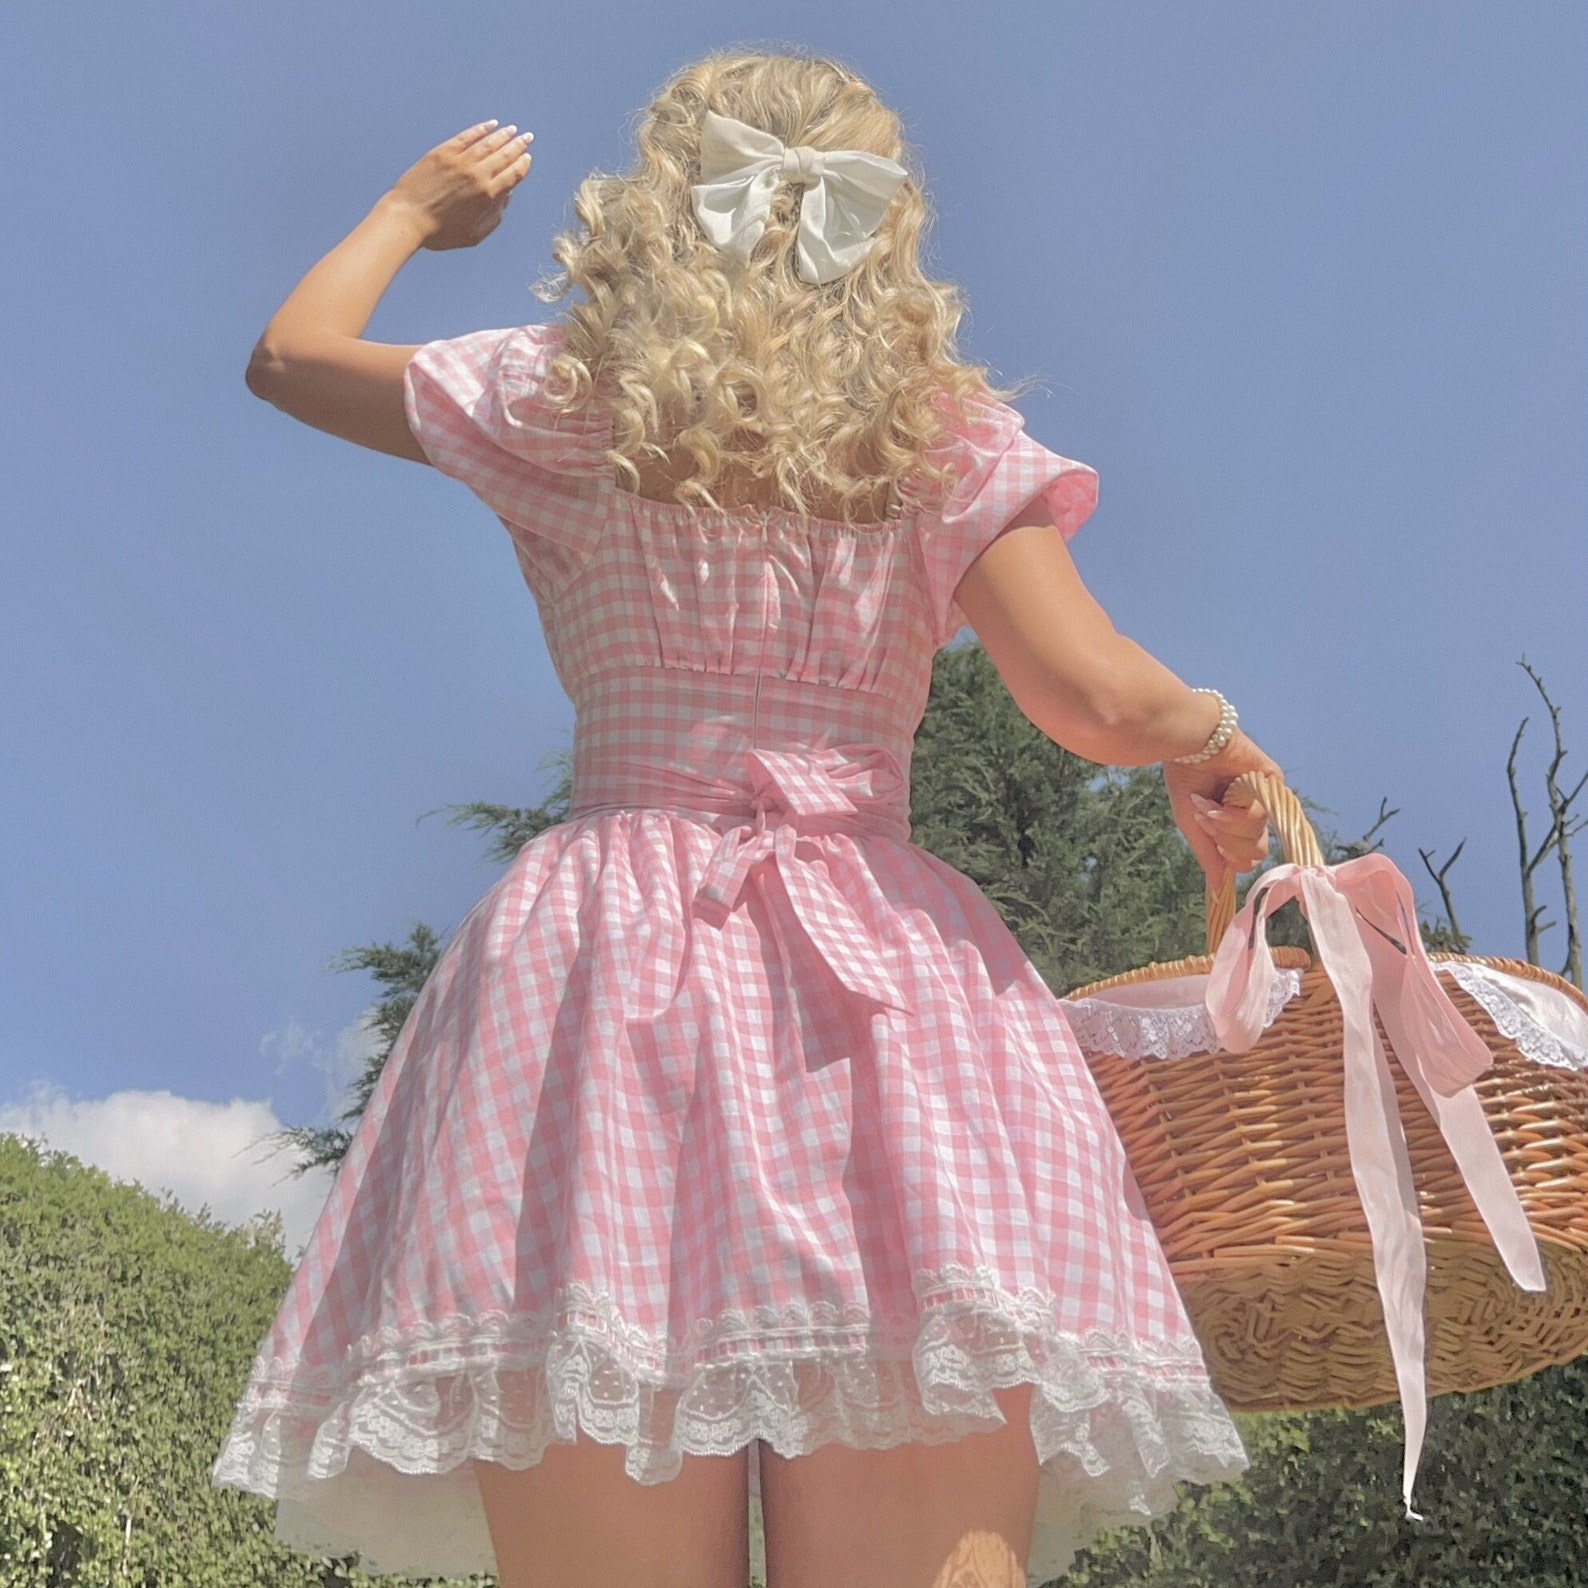 Alice Dress in Pink Gingham Cotton Handmade, Ethical, Alice in ...